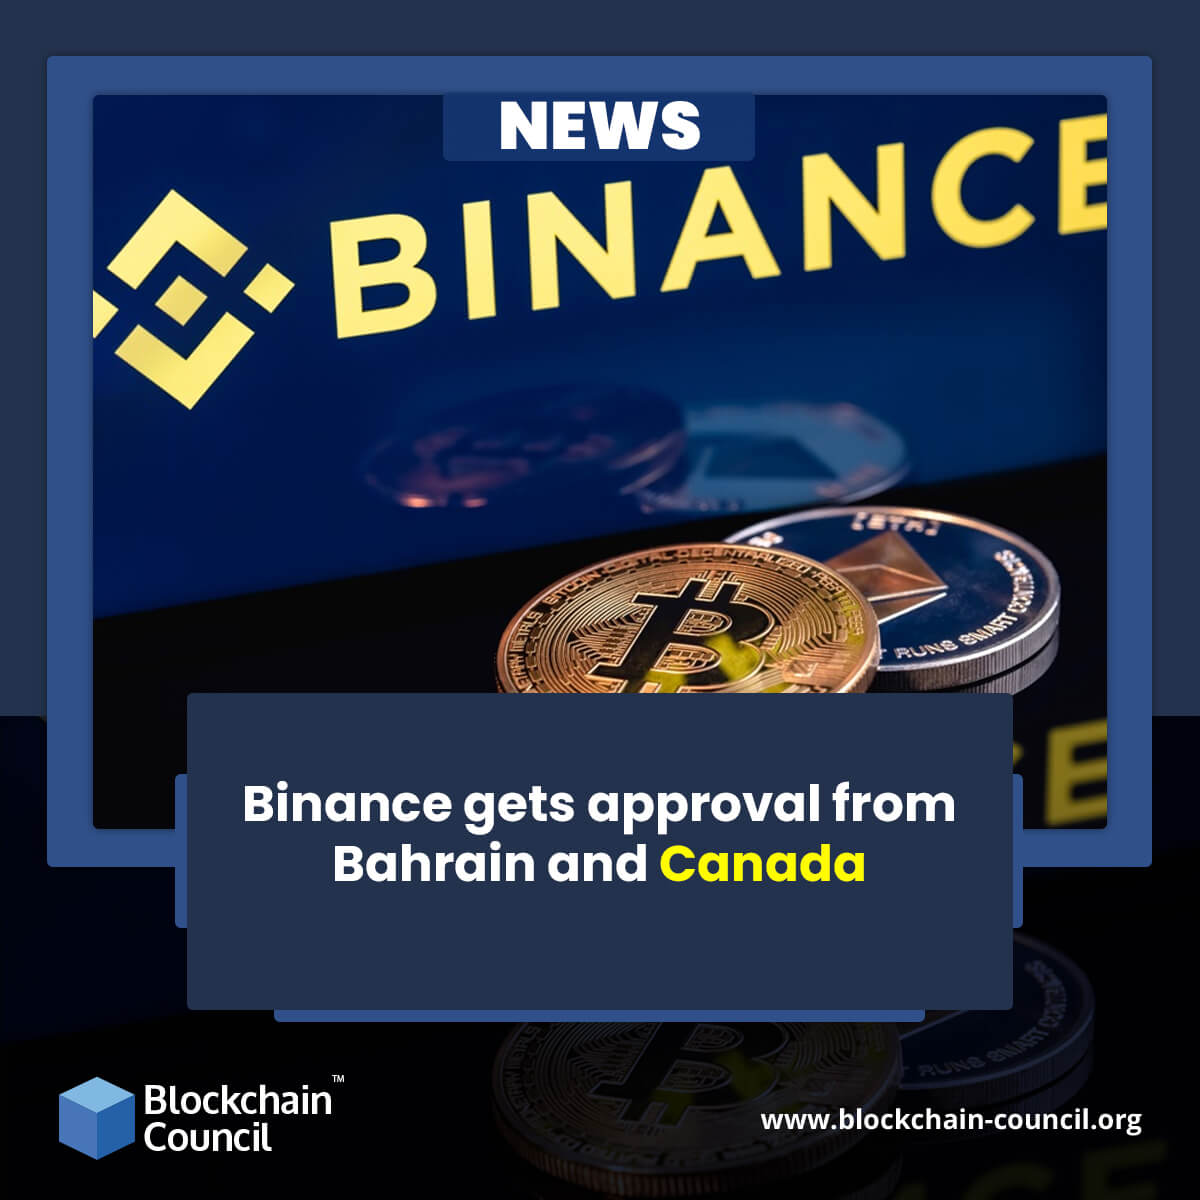 Binance gets approval from Bahrain and Canada news